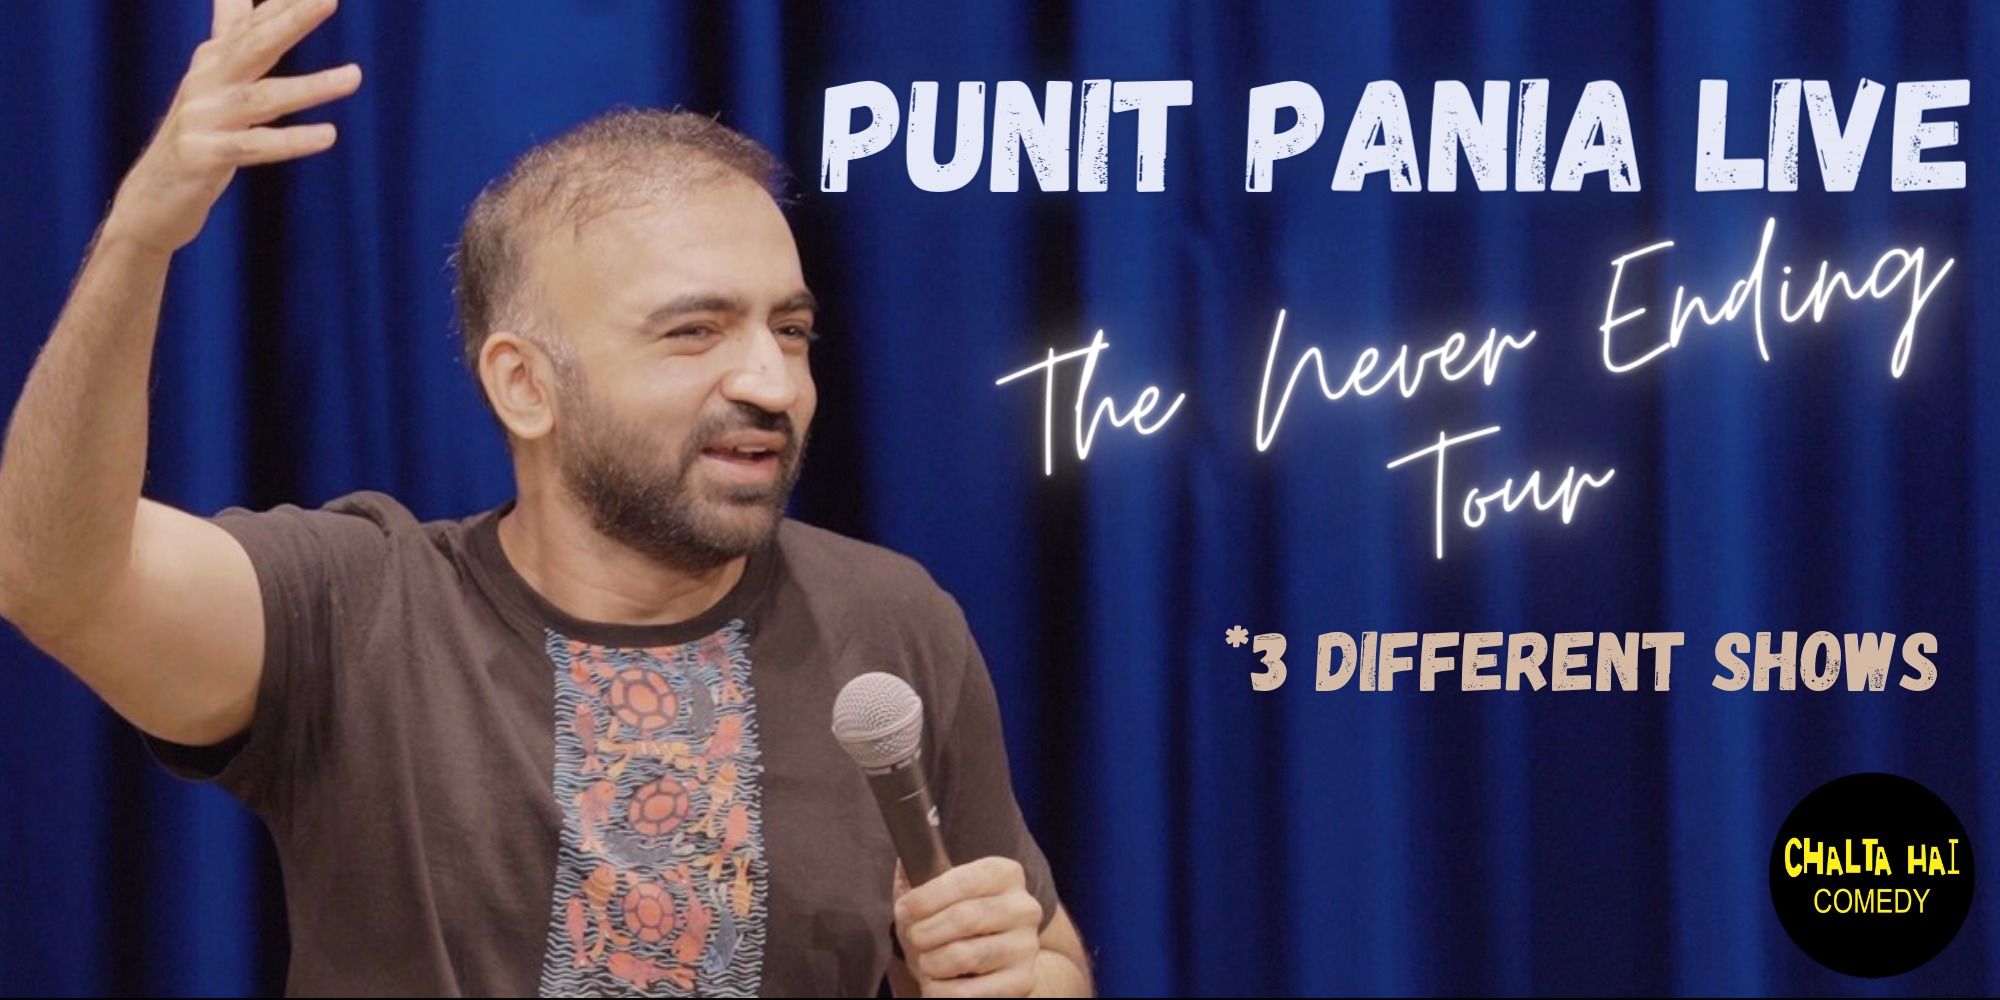 Punit Pania Live – The Never Ending Tour in Nagpur